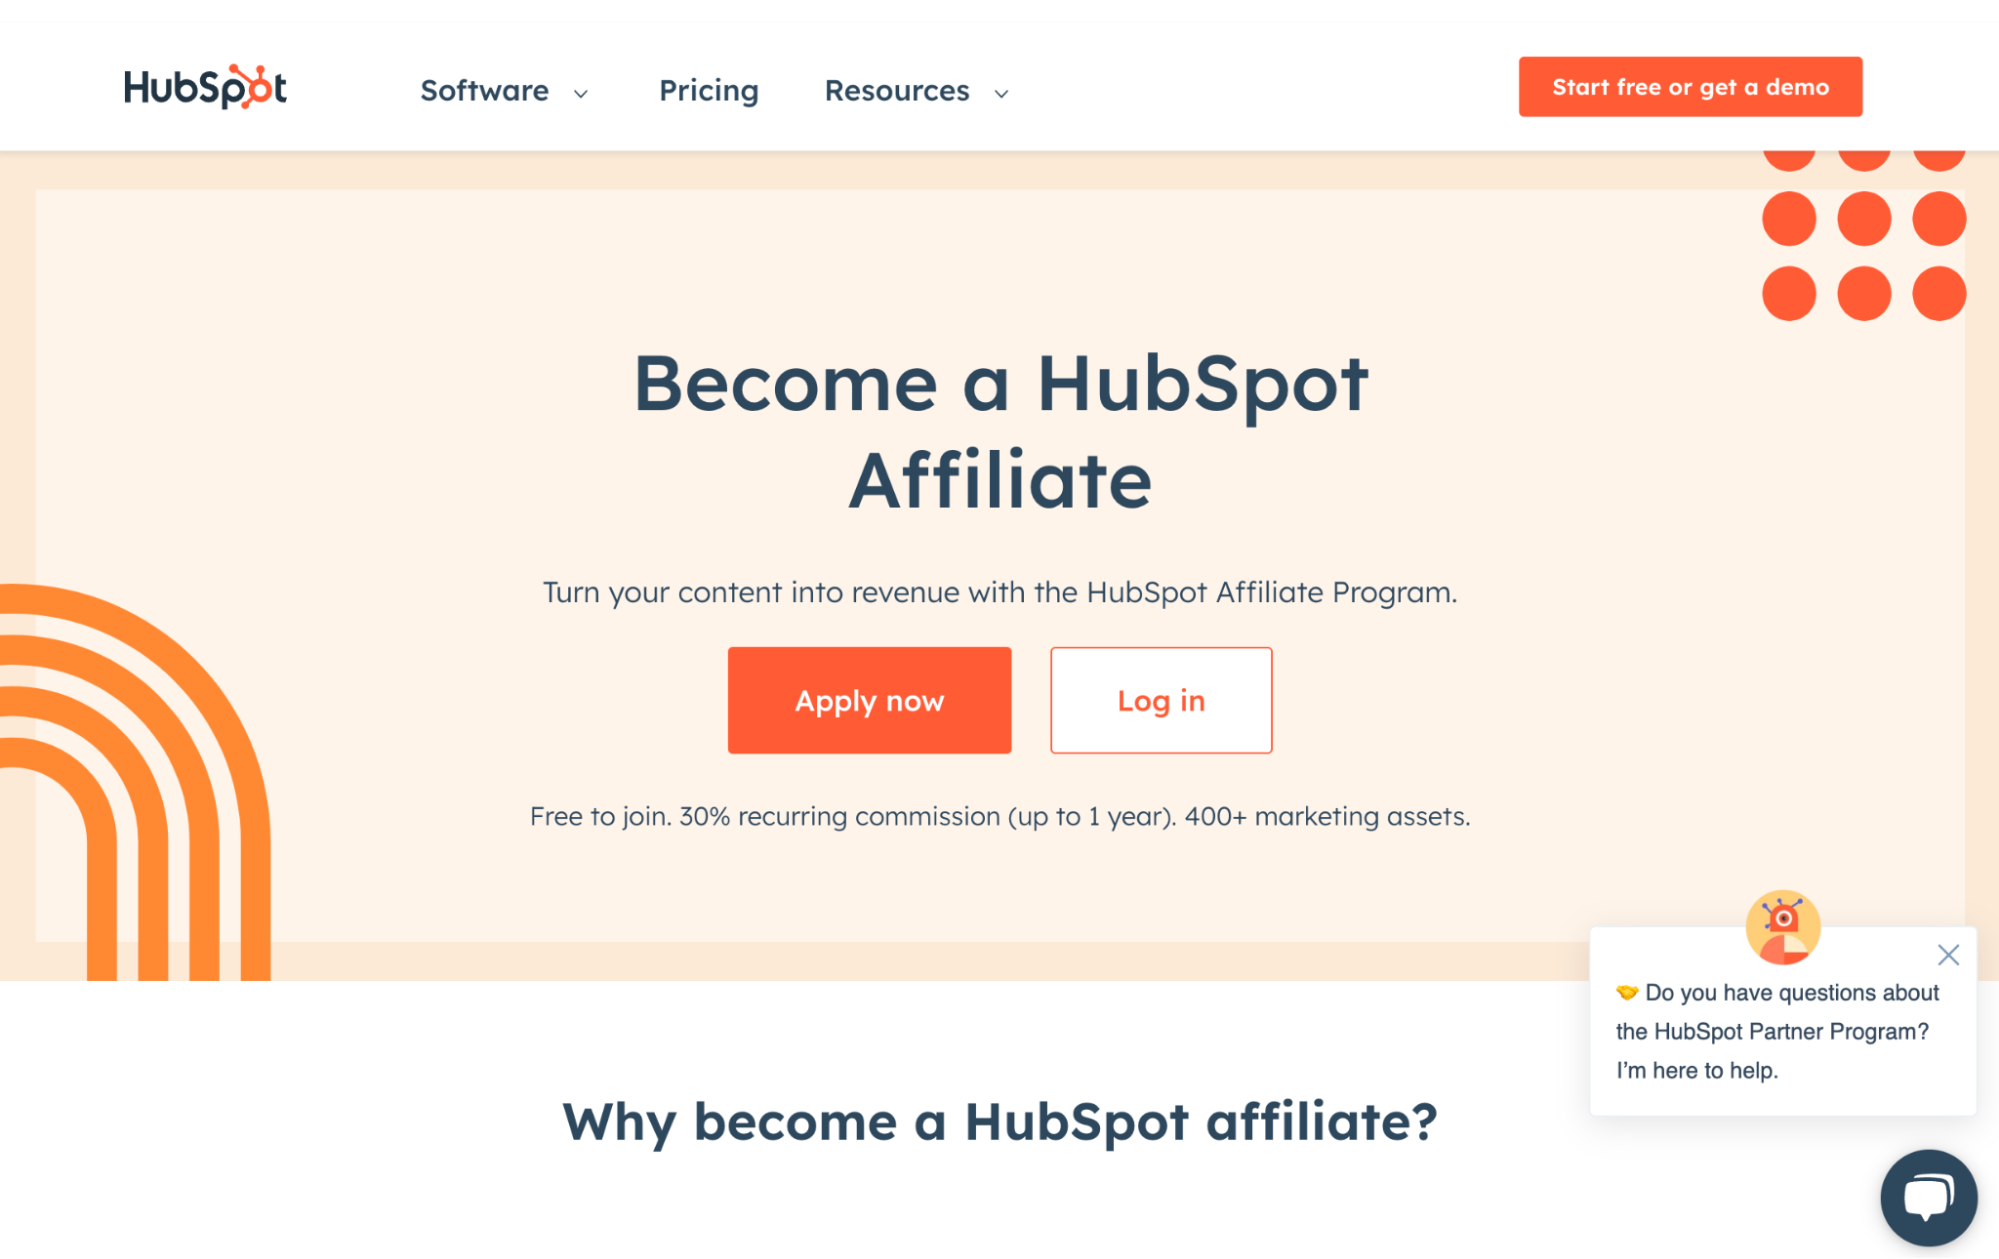 The HubSpot &quot;Become a HubSpot Affiliate &quot; webpage